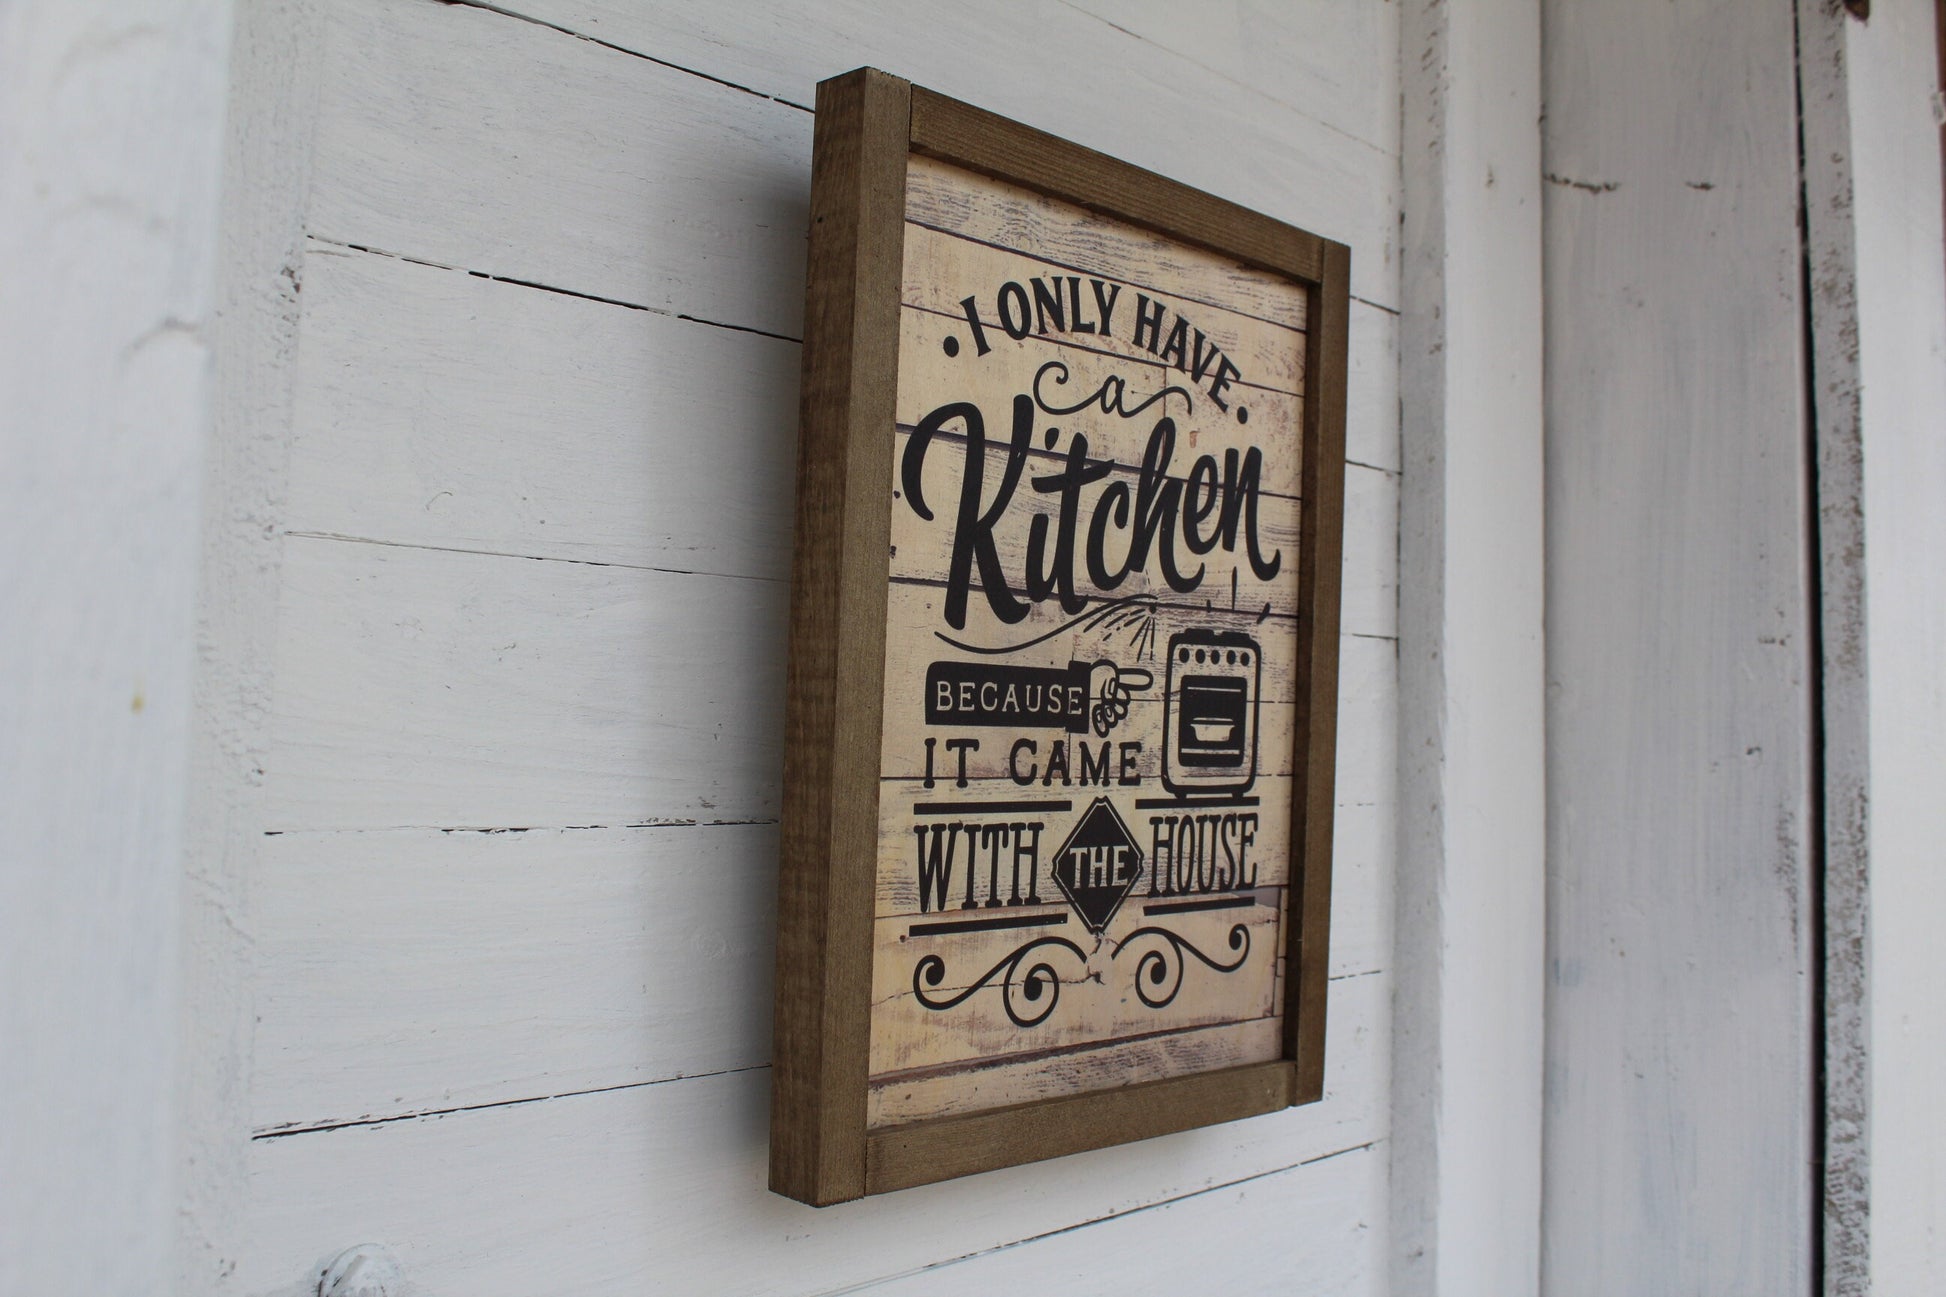 Kitchen Wood Sign Joke I Only Have A Kitchen Because It Came With the House Rustic Pallet Farmhouse Primitive Wall Oven Scroll Art Décor